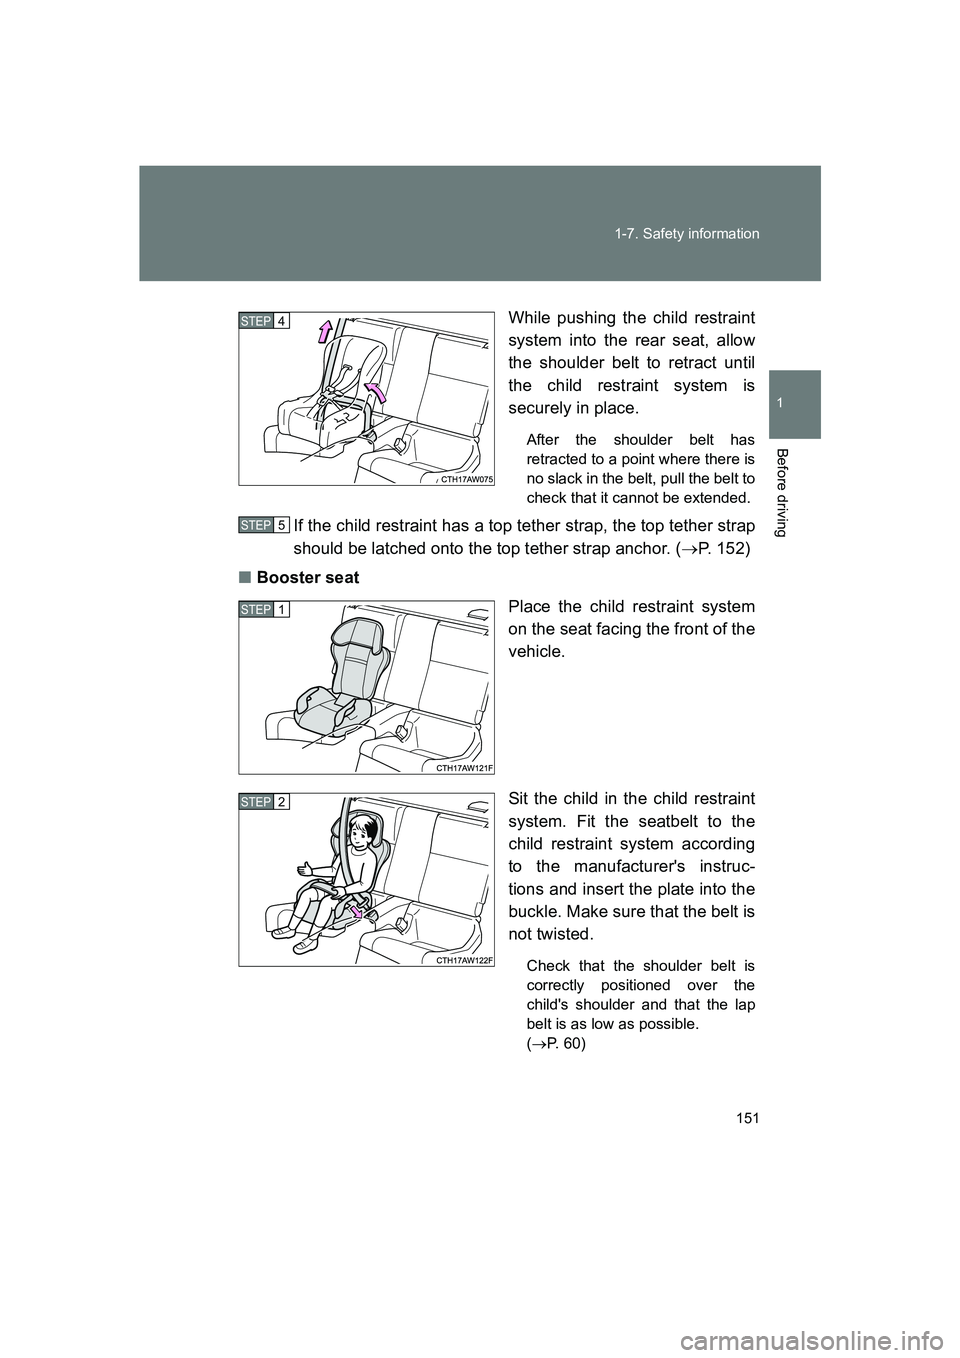 SUBARU BRZ 2019 Owners Manual 151
1-7. Safety information
1
Before driving
BRZ_U
While pushing the child restraint
system into the rear seat, allow
the shoulder belt to retract until
the child restraint system is
securely in place